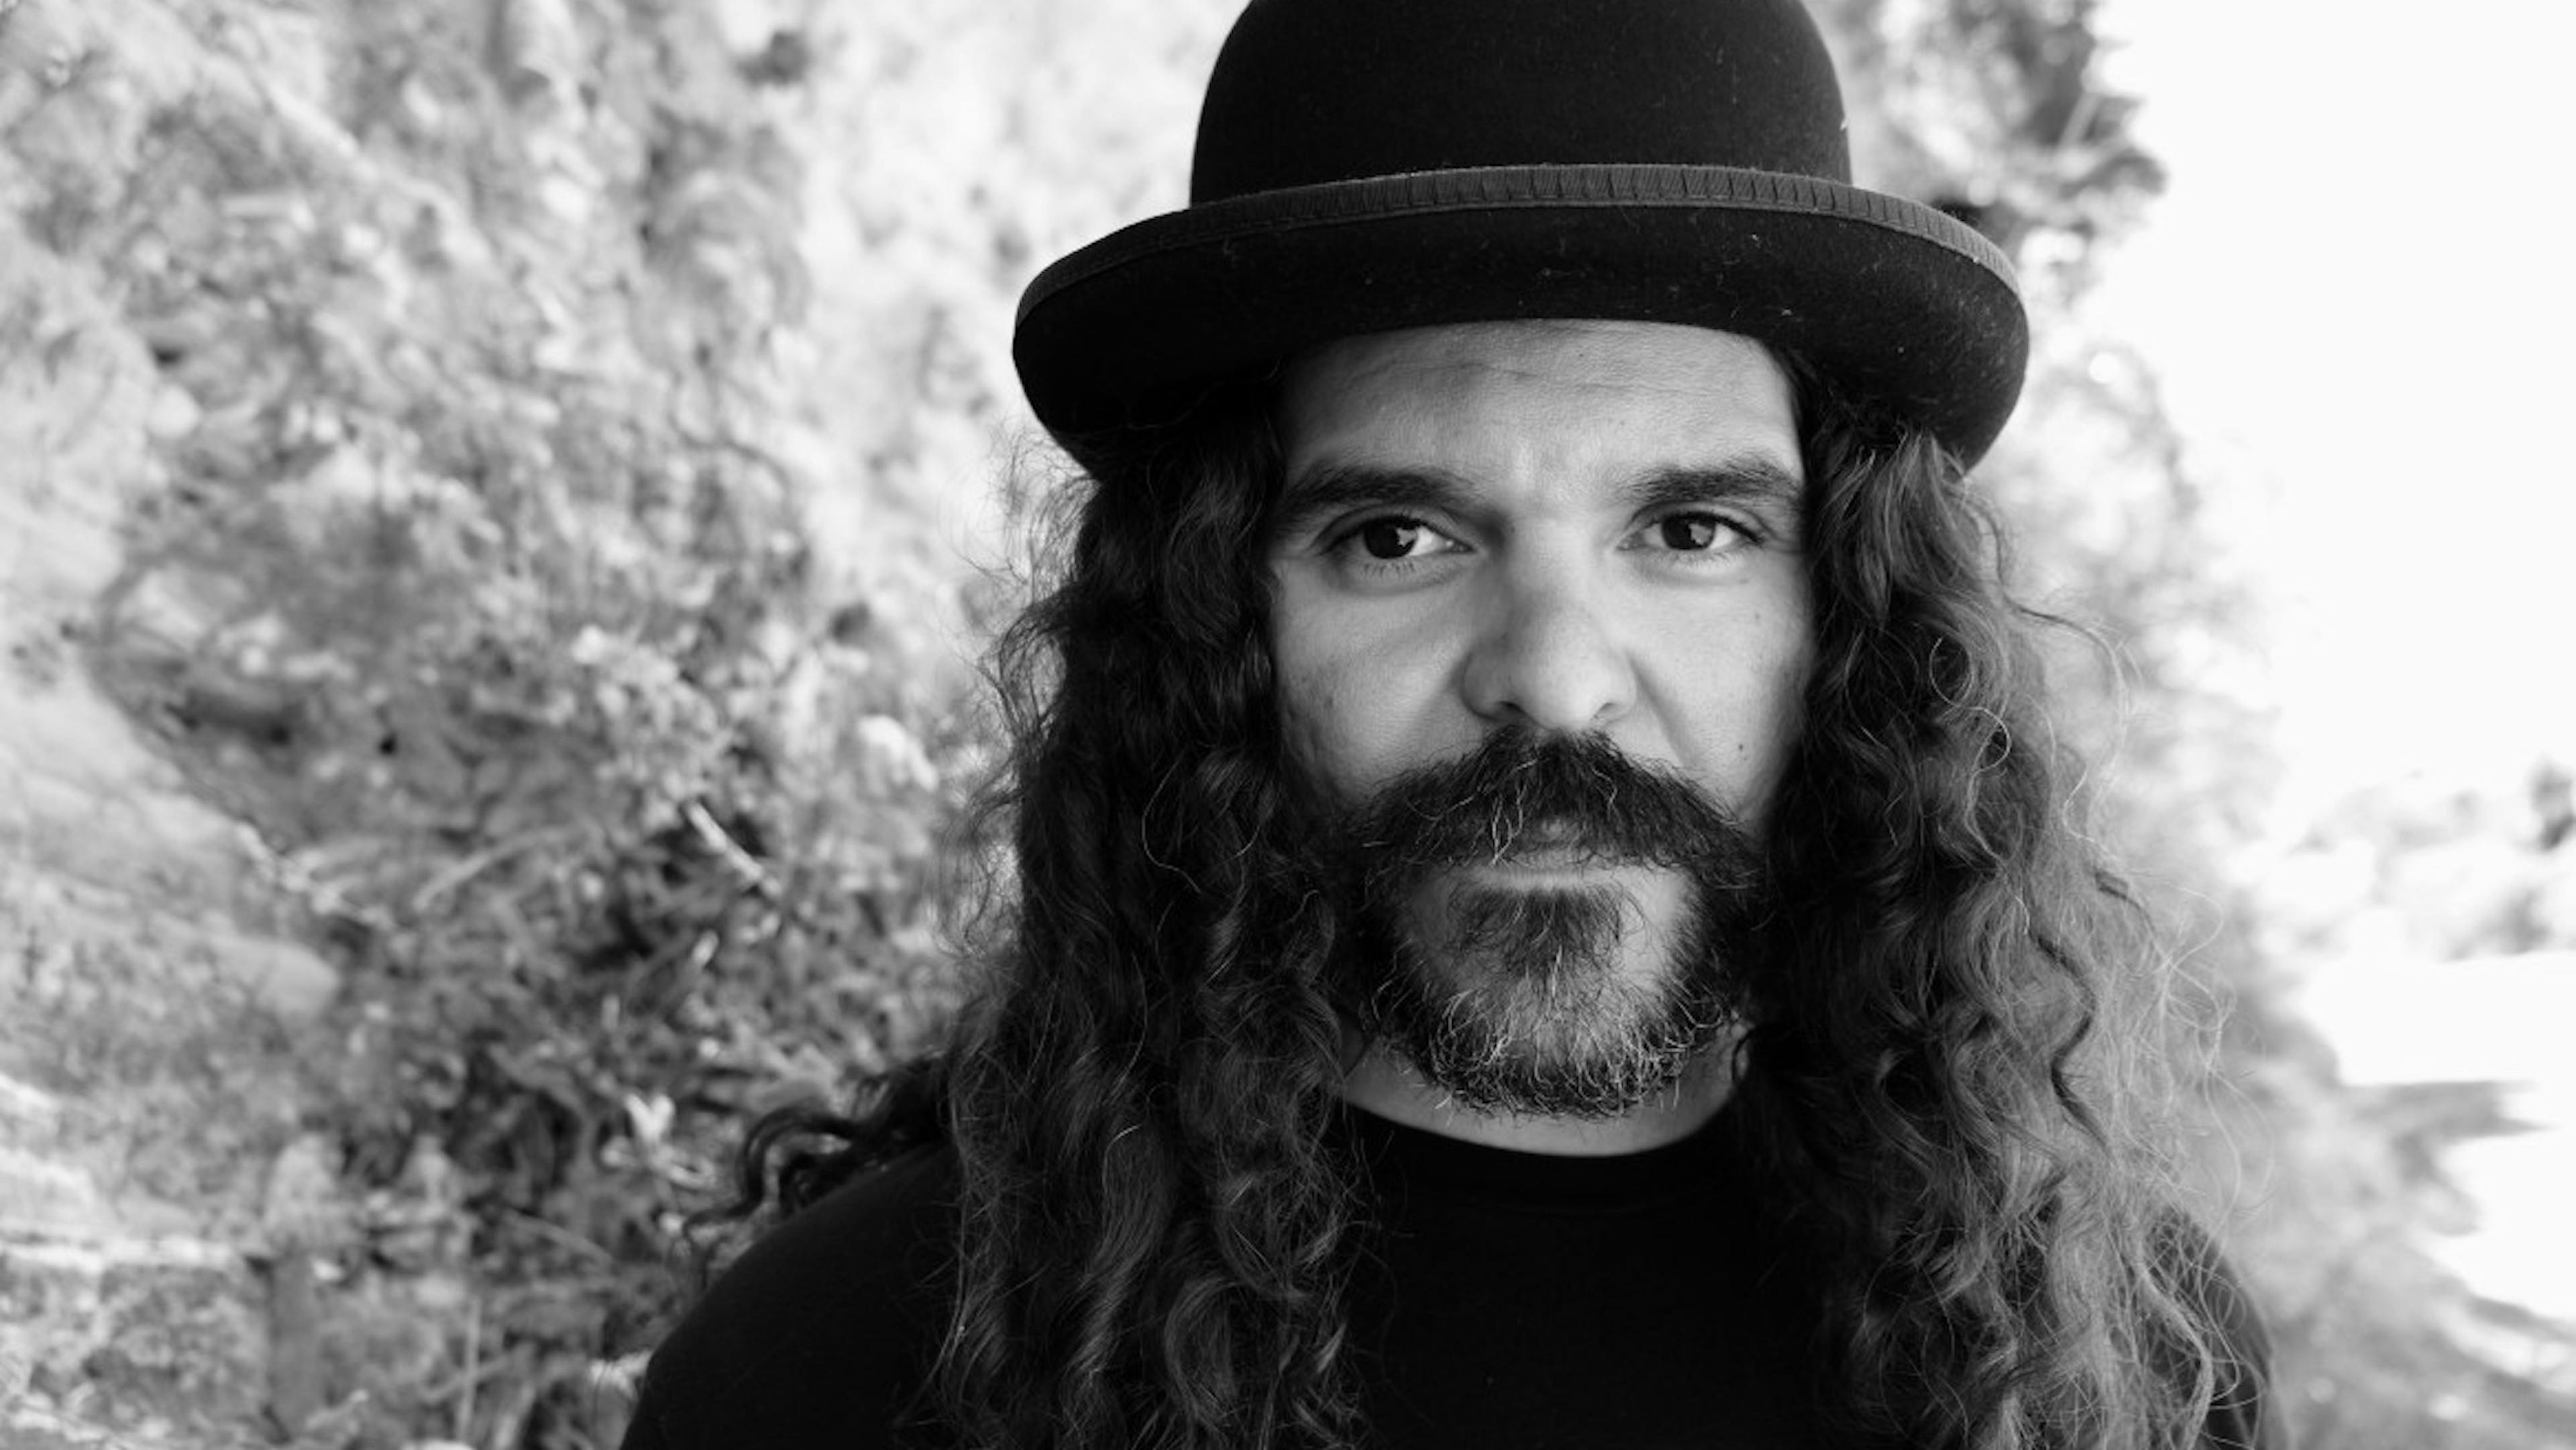 Brant Bjork Sets Up GoFundMe To Replace Instruments Following Robbery In Sweden